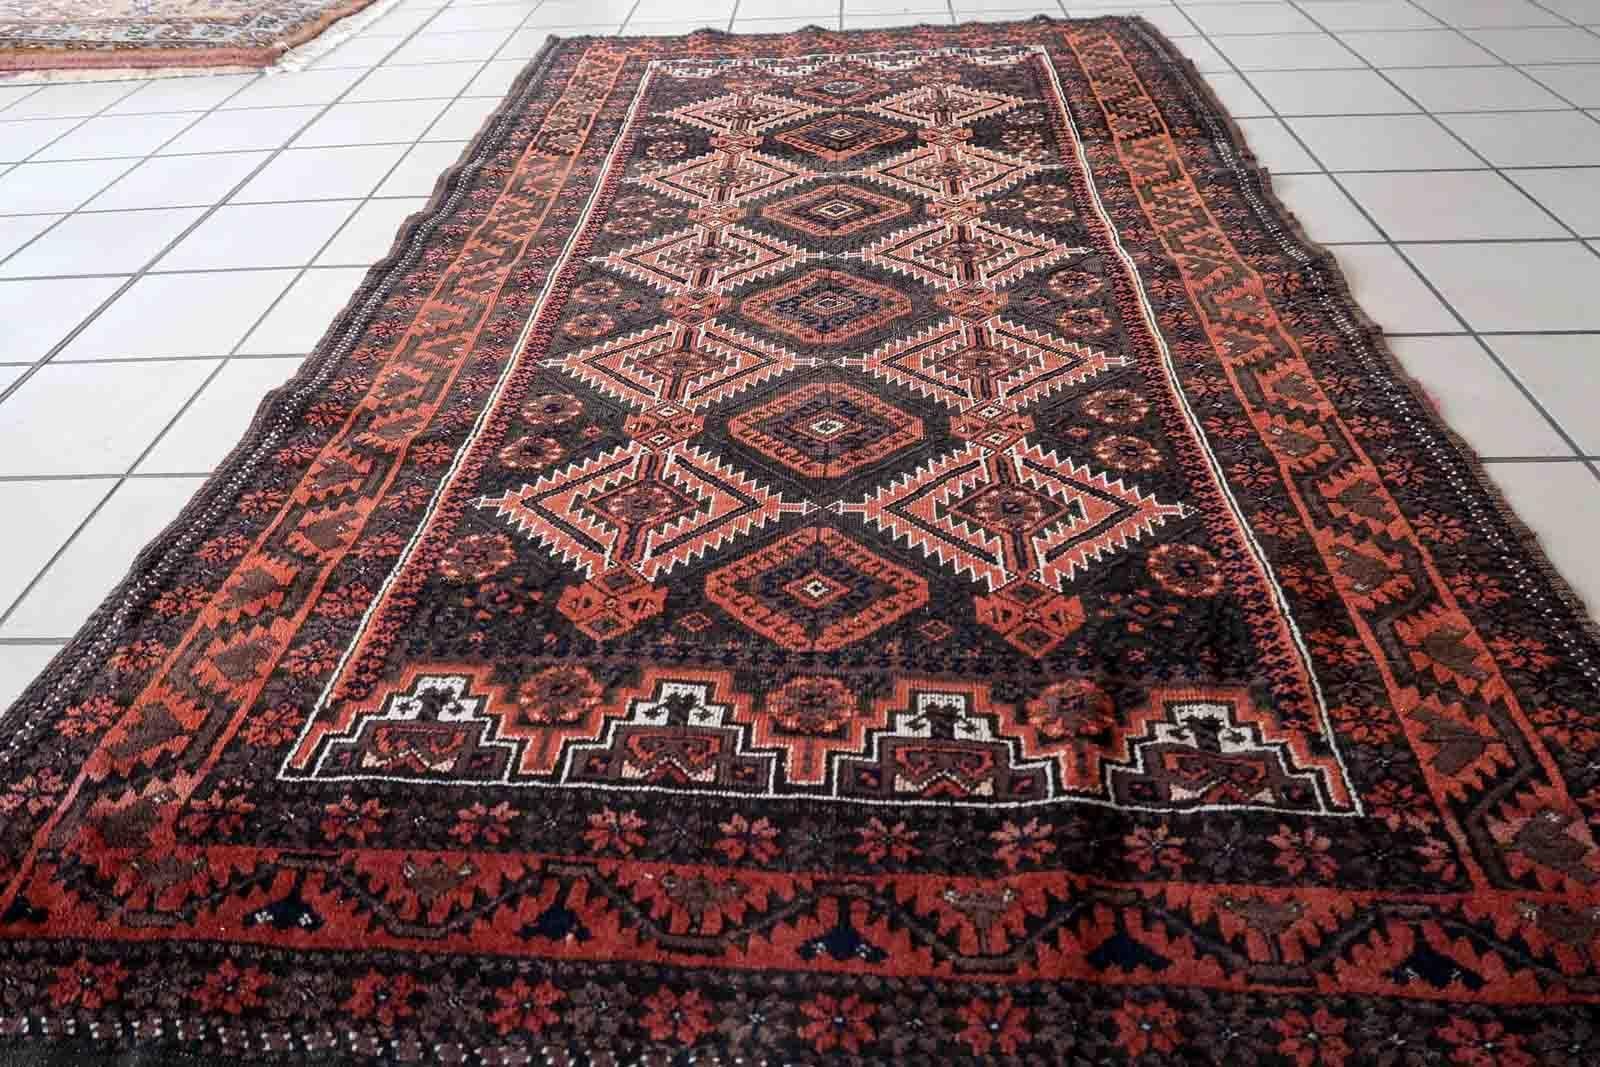 Handmade antique Afghan Baluch rug in traditional tribal design. The rug is from the beginning of 20th century in original condition, it yhas some minimal low pile.

-condition: original, some low,

-circa: 1920s,

-Size: 2.9' x 5.9' (102cm x